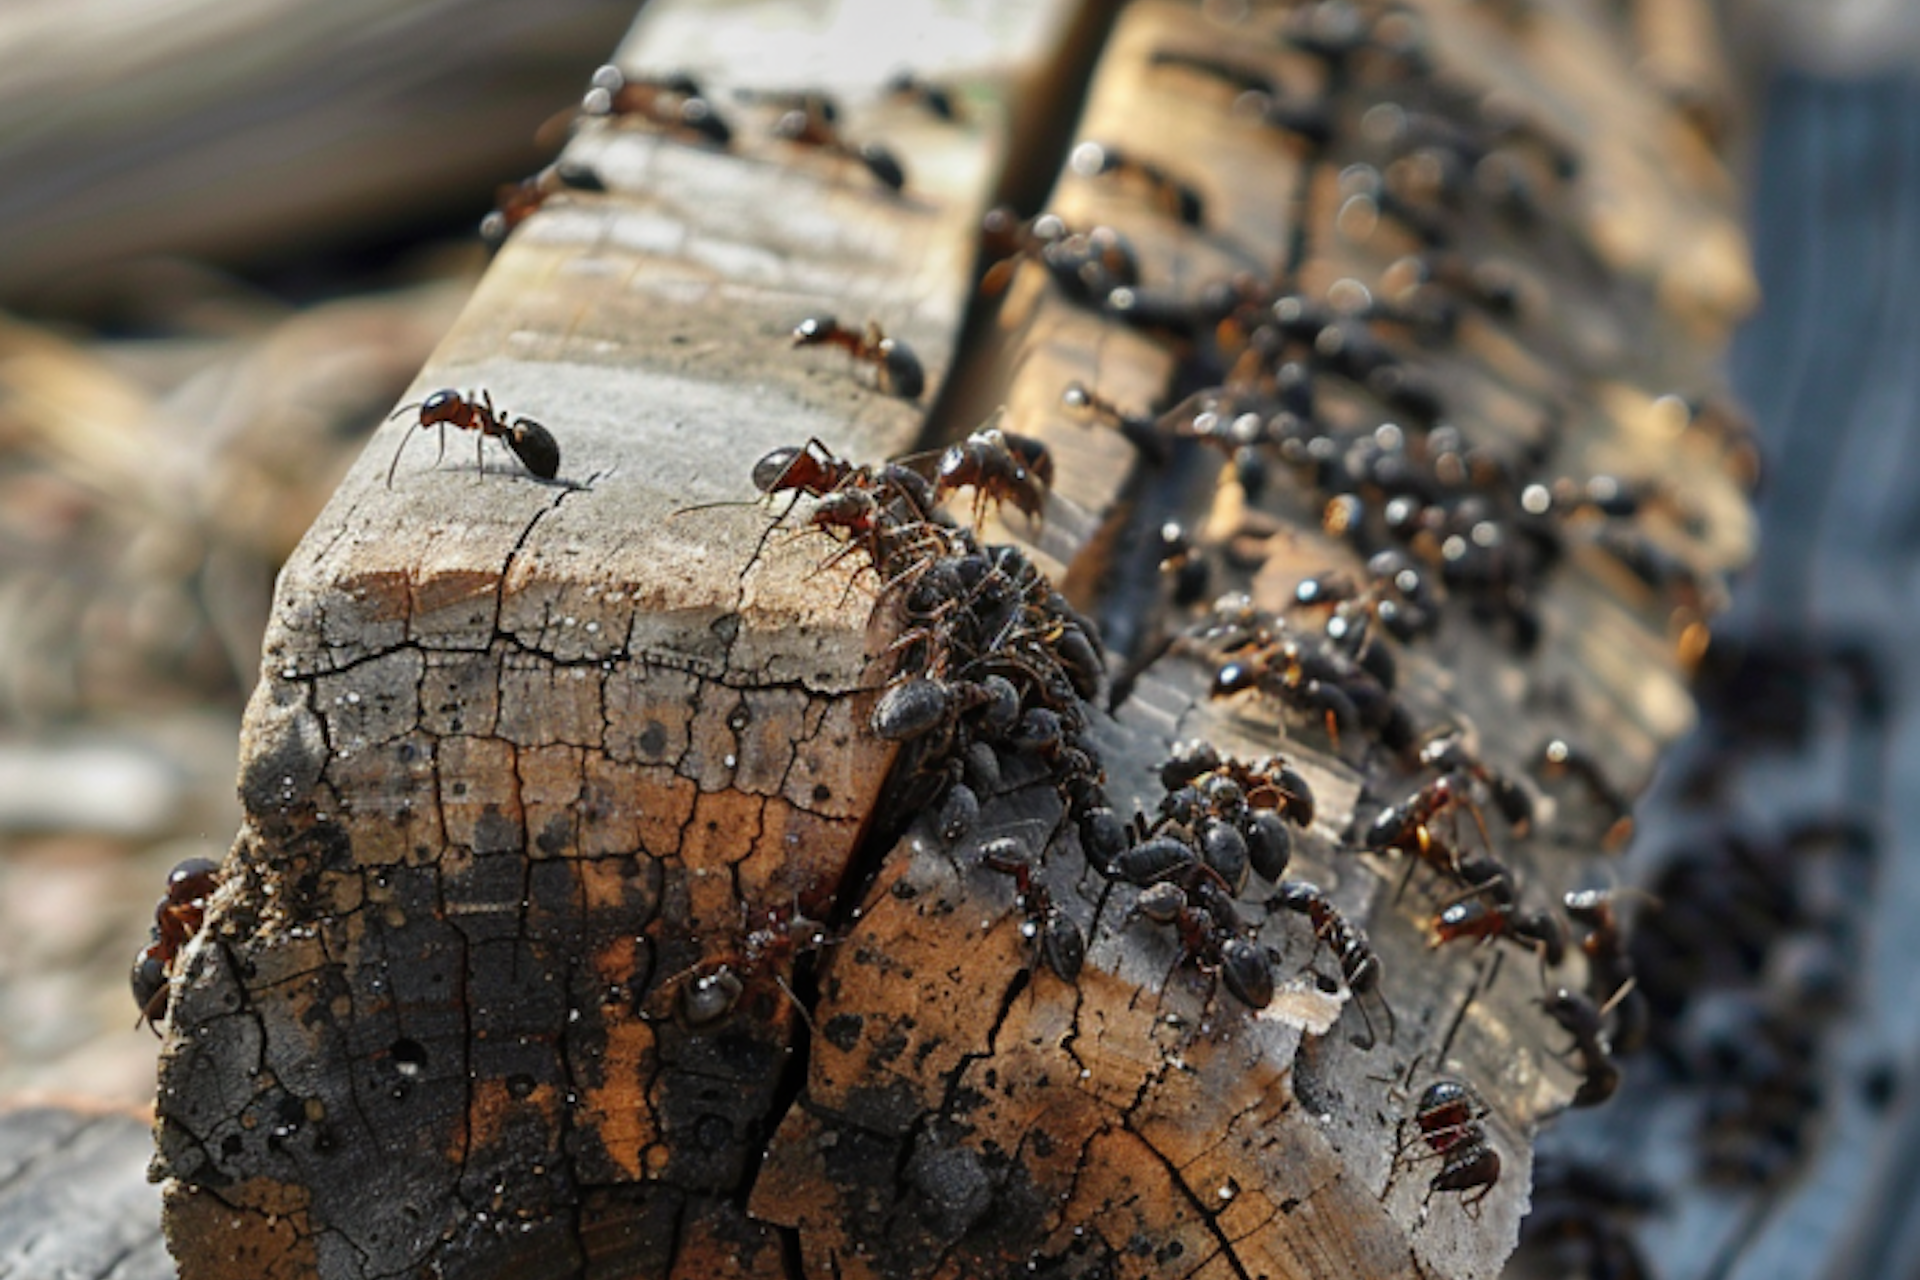 Wood-destroying organisms, or WDOs, are classified as any organism that impacts the structural integrity of wood